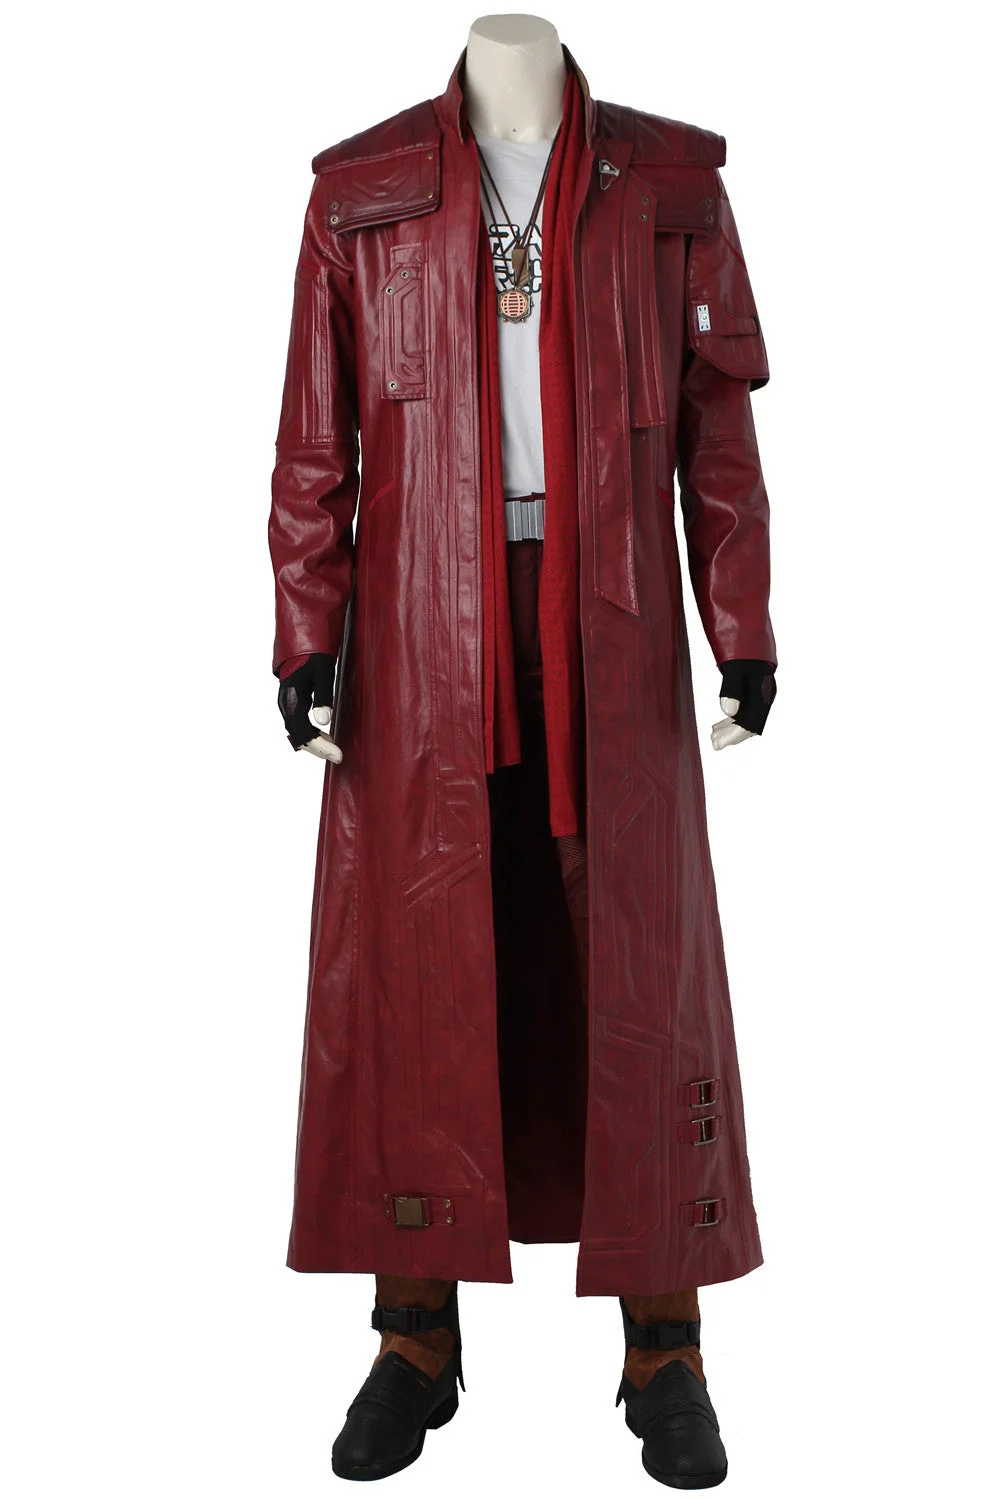 Marvel Guardians of the Galaxy Vol. 2 Star-Lord Peter Jason Quill Cosplay Costume